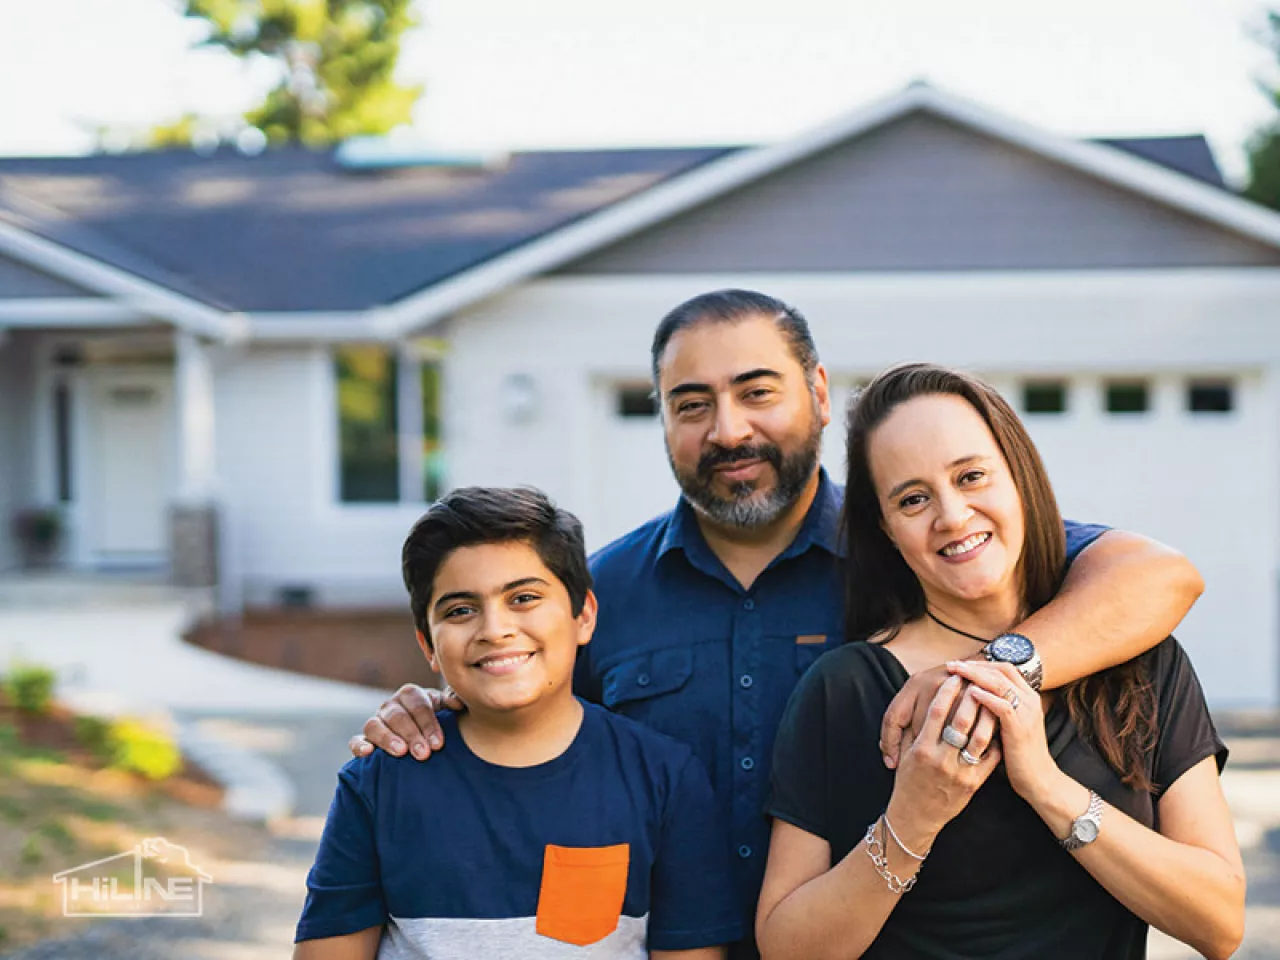 How Do Interest Rates Affect Mortgages and Home Building?